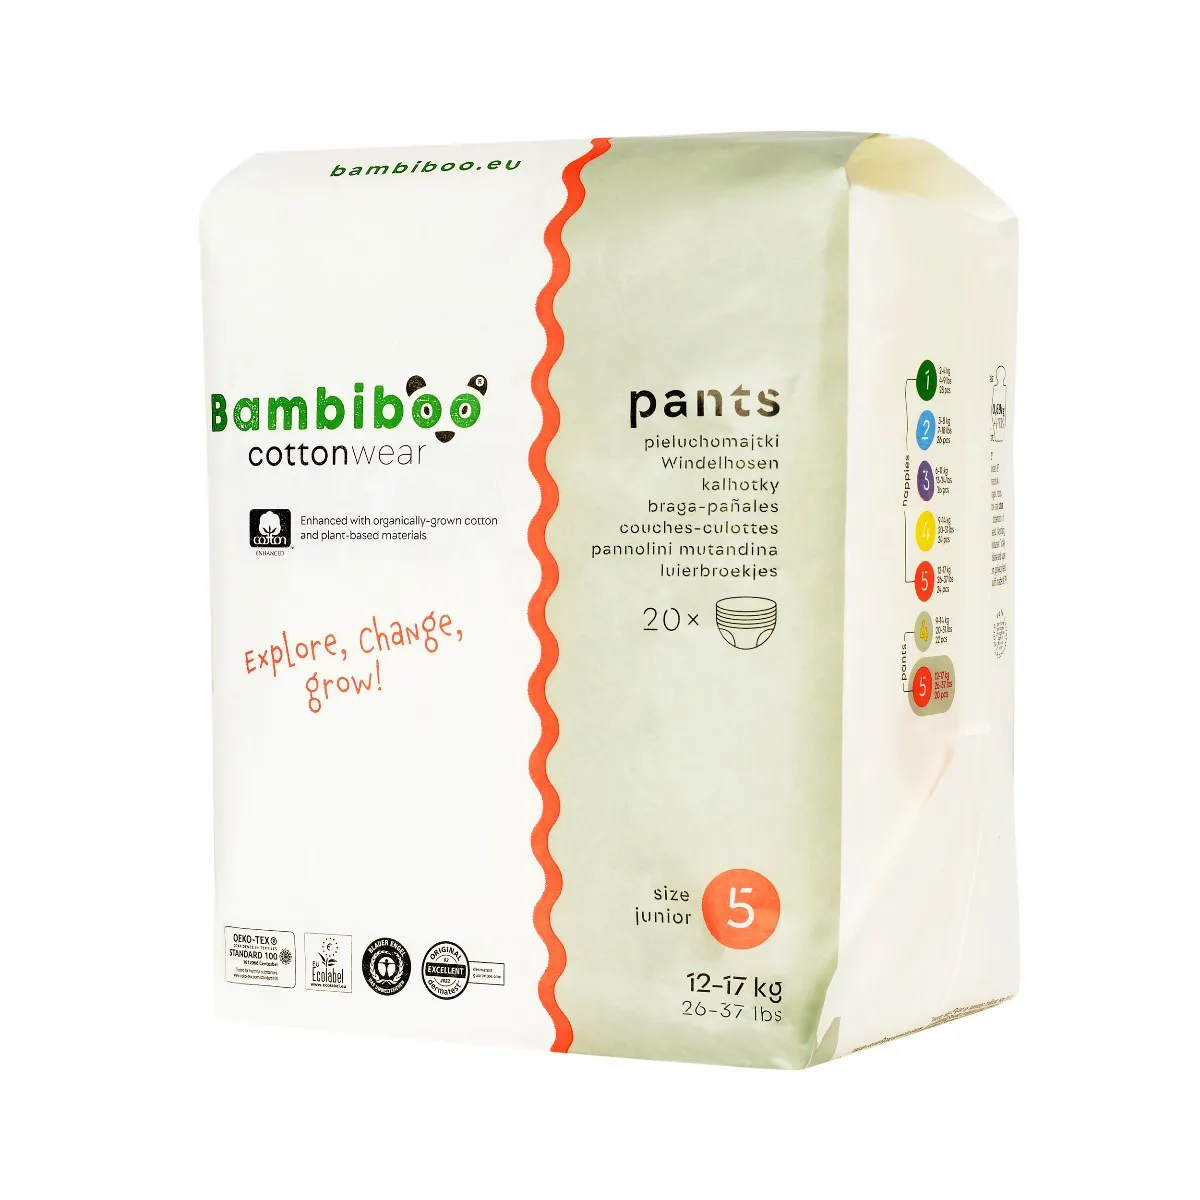 Bambiboo COTTONWEAR disposable pants with organic cotton, size 5